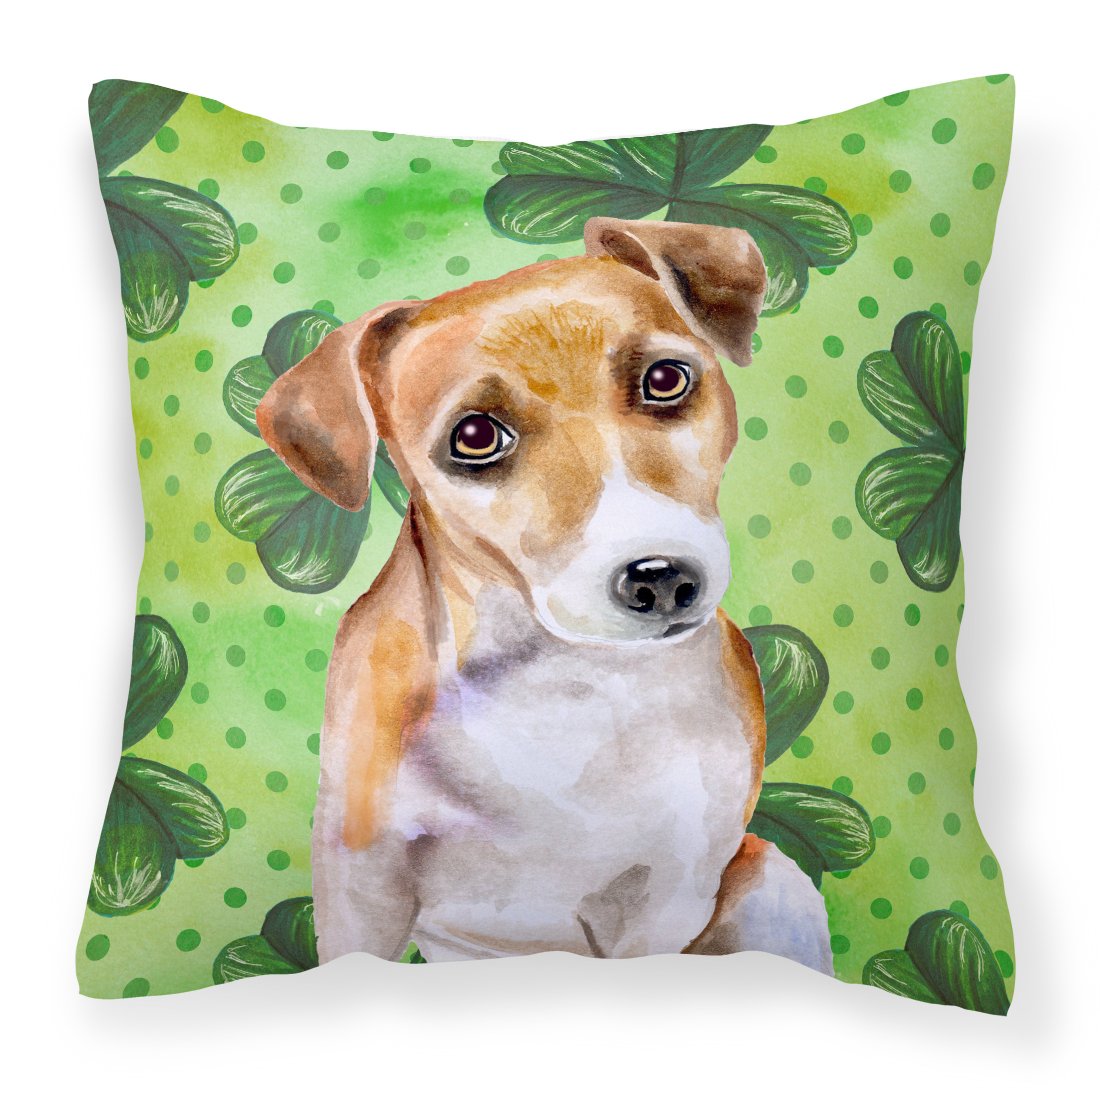 Jack Russell Terrier #2 St Patrick's Fabric Decorative Pillow BB9887PW1818 by Caroline's Treasures